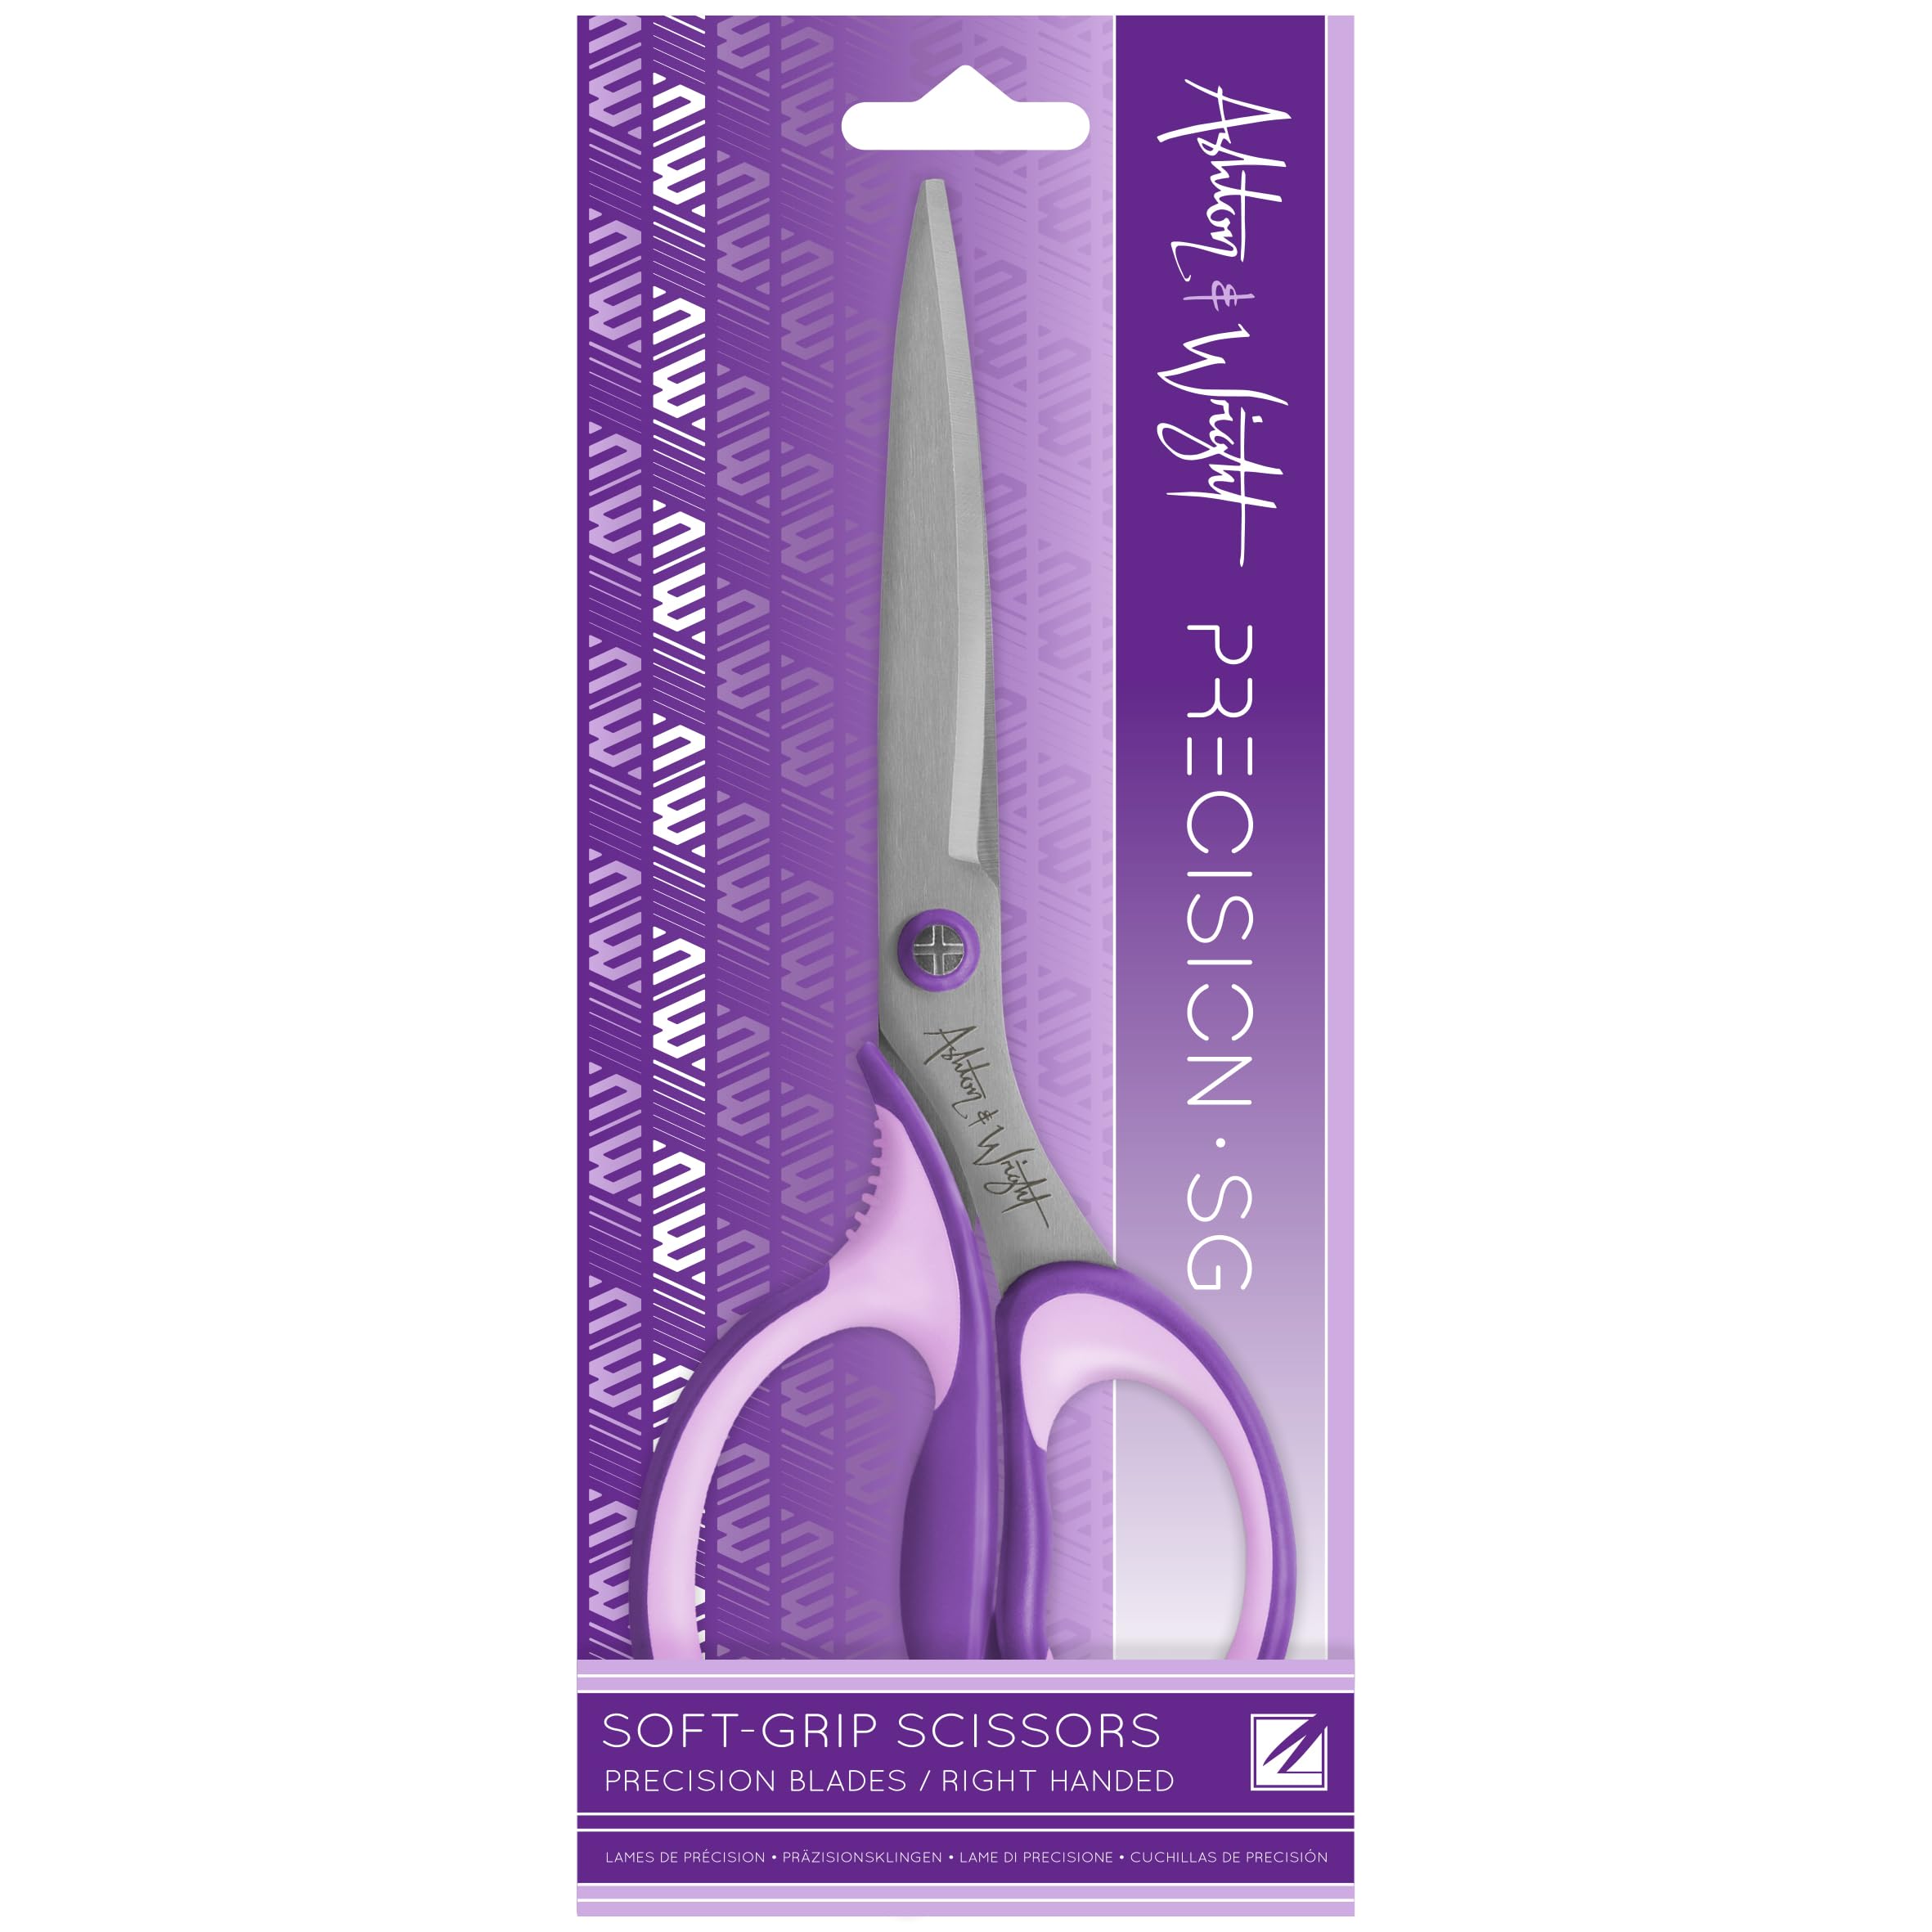 Ashton and Wright - Precision SG - Soft Grip Scissors for Office, Home, Kitchen, and Craft - 210mm / 8” - Steel Blades (Purple, Right Handed)